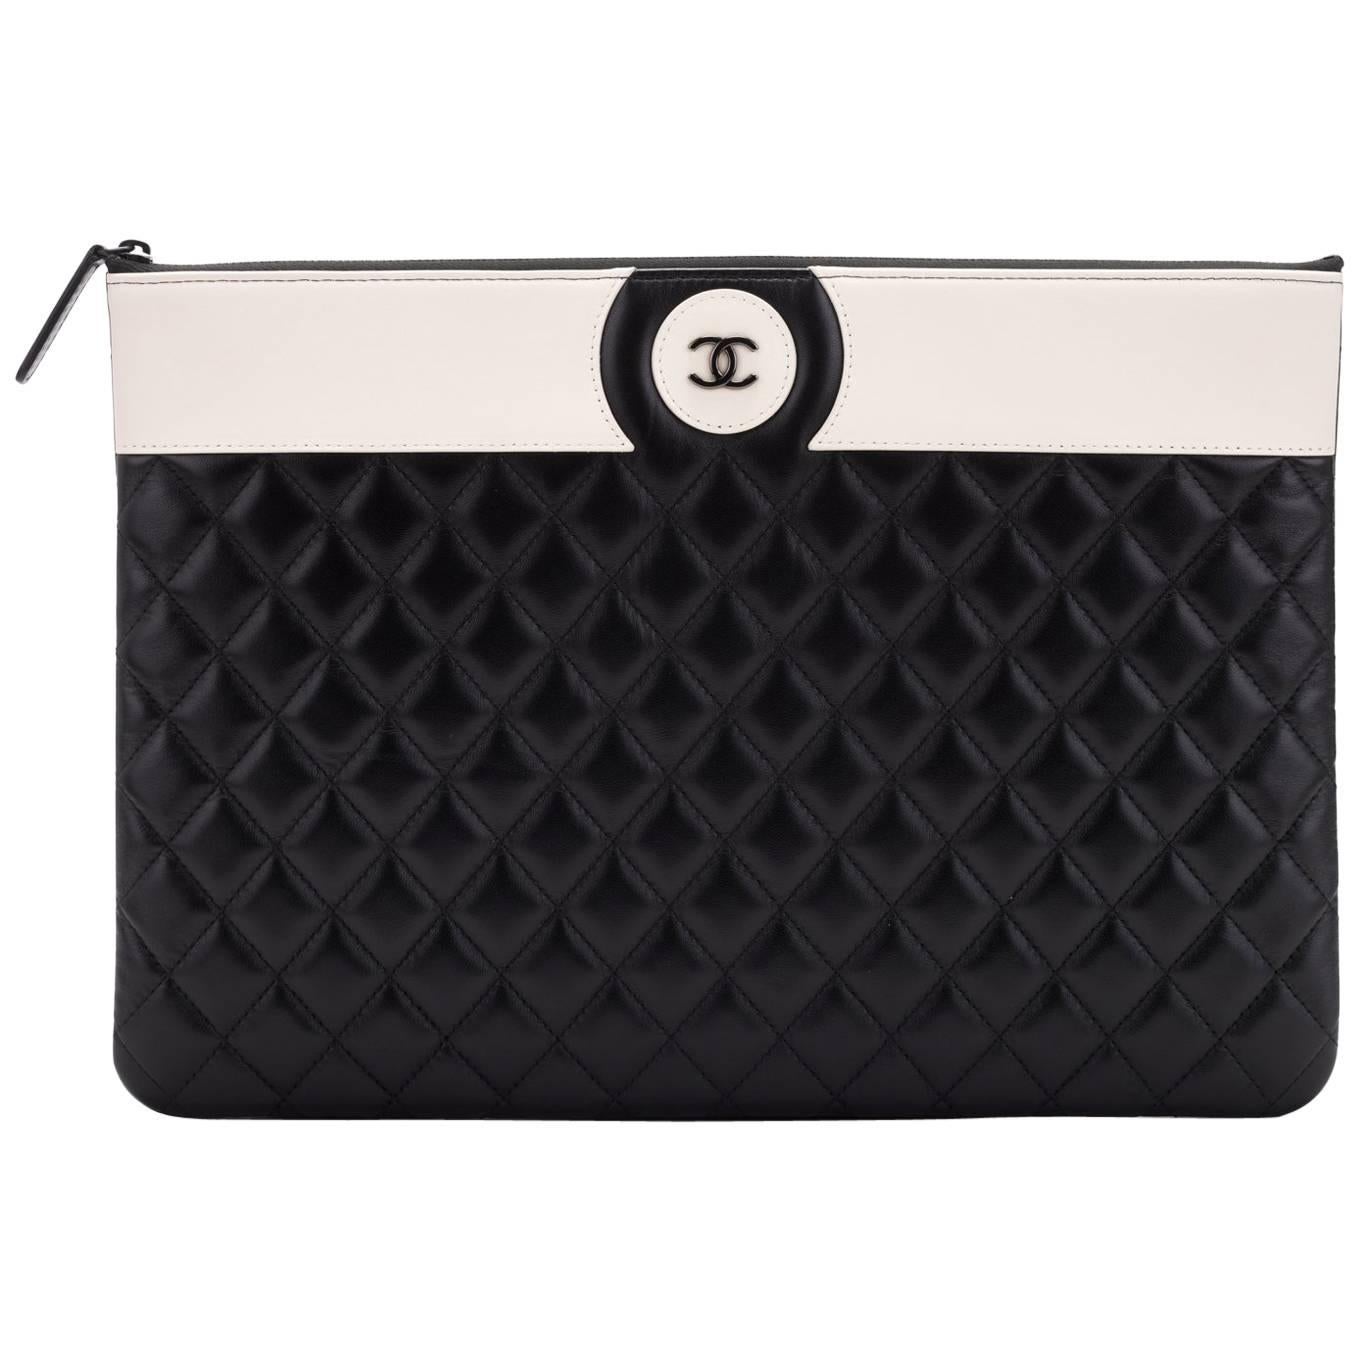 New Chanel Black White Large Clutch Bag